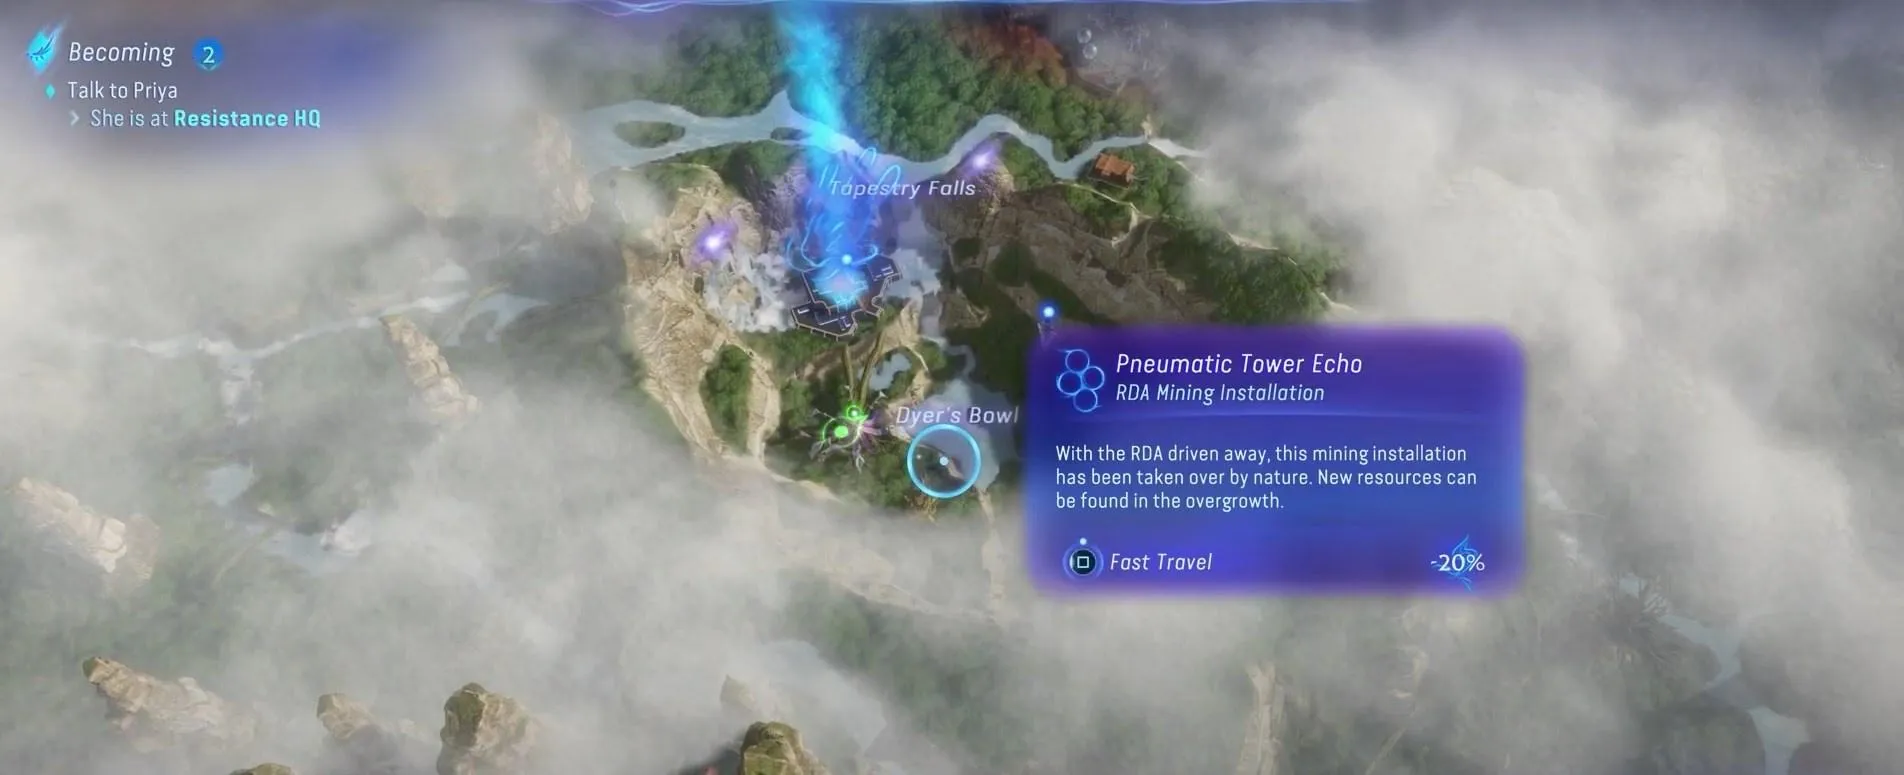 How To Fast Travel in Avatar Frontiers of Pandora.jpeg